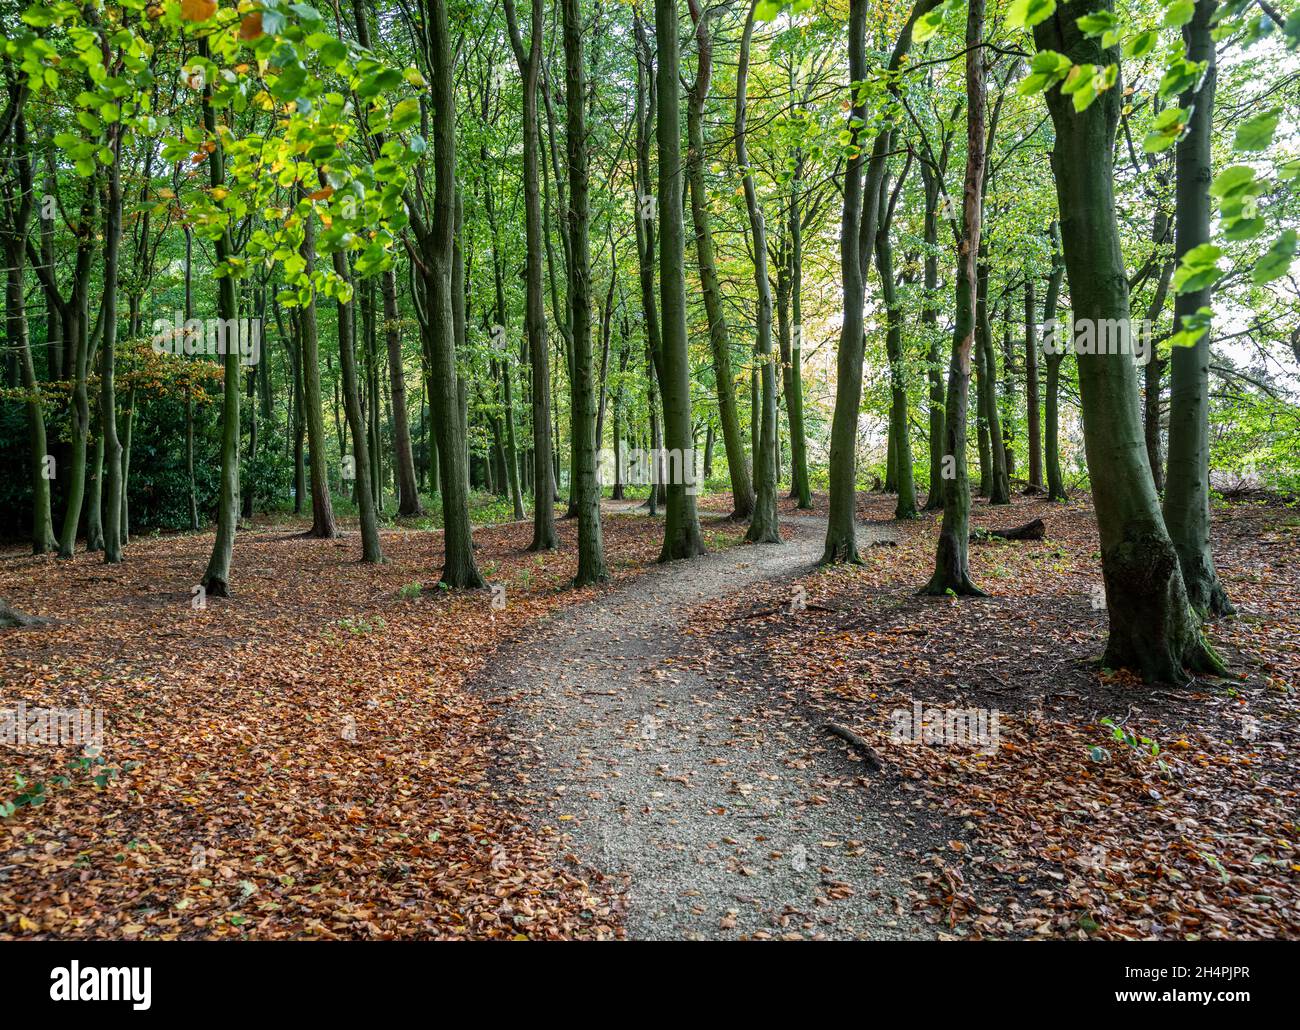 Autumn woodland with green leaf canopy and fallen leave on ground with trail through the trees. Stock Photo